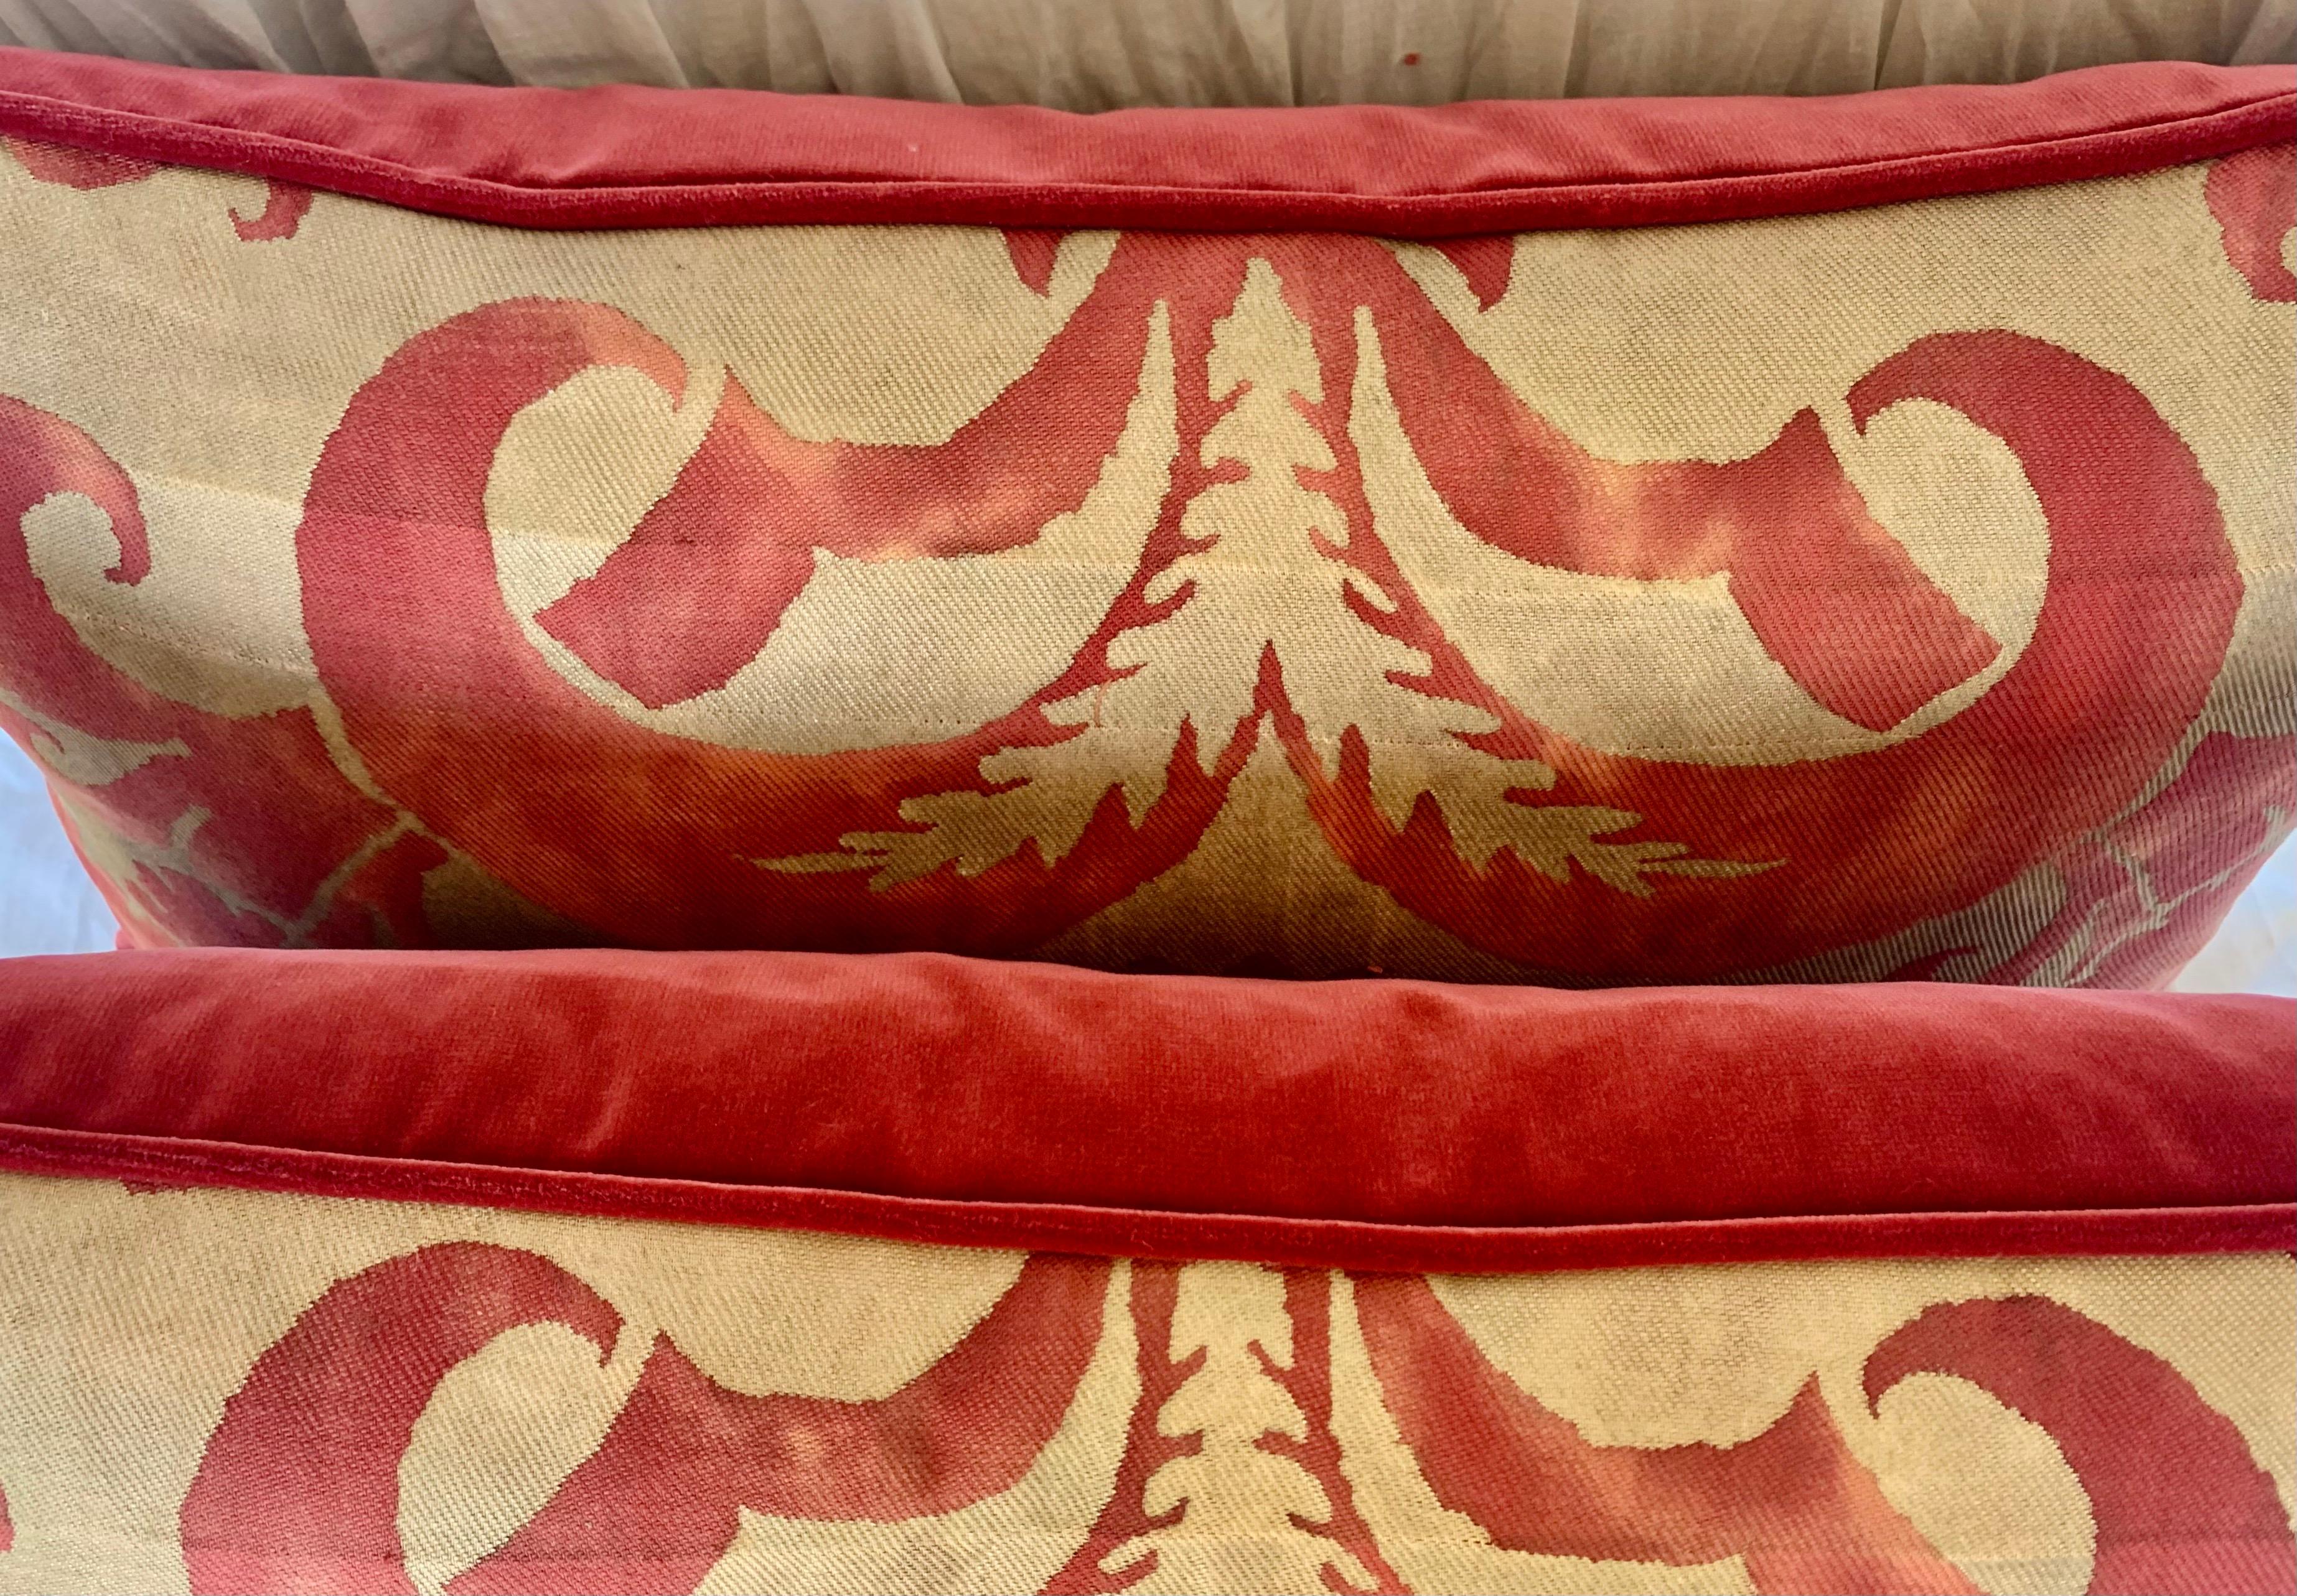 Mid-Century Modern Pair of Glicine Patterned Fortuny Pillows